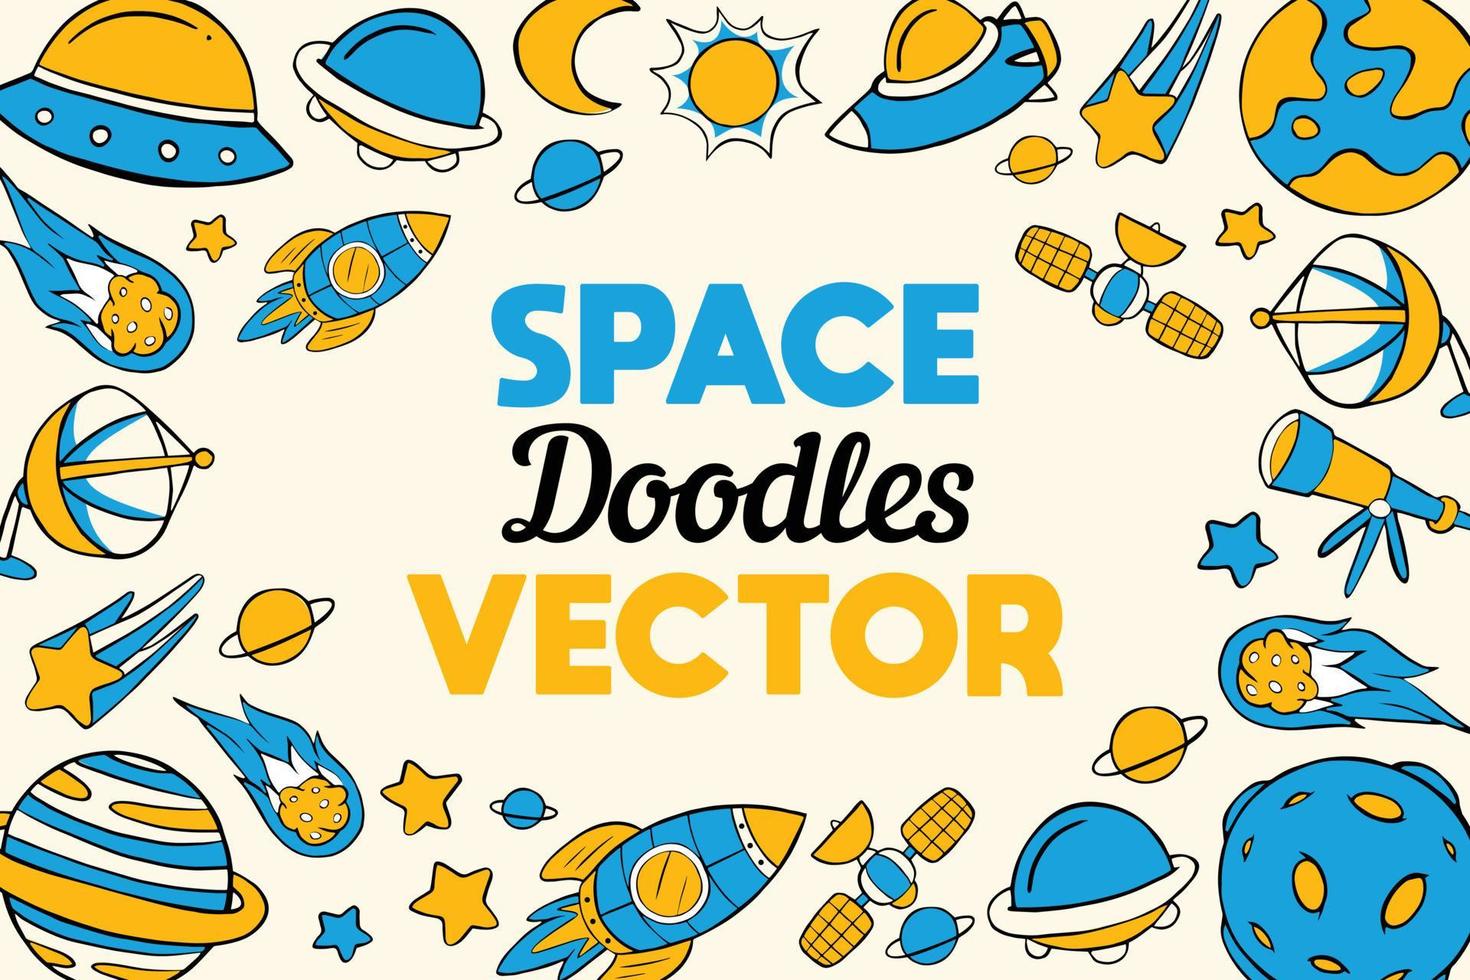 space doodles vector background in cartoon style